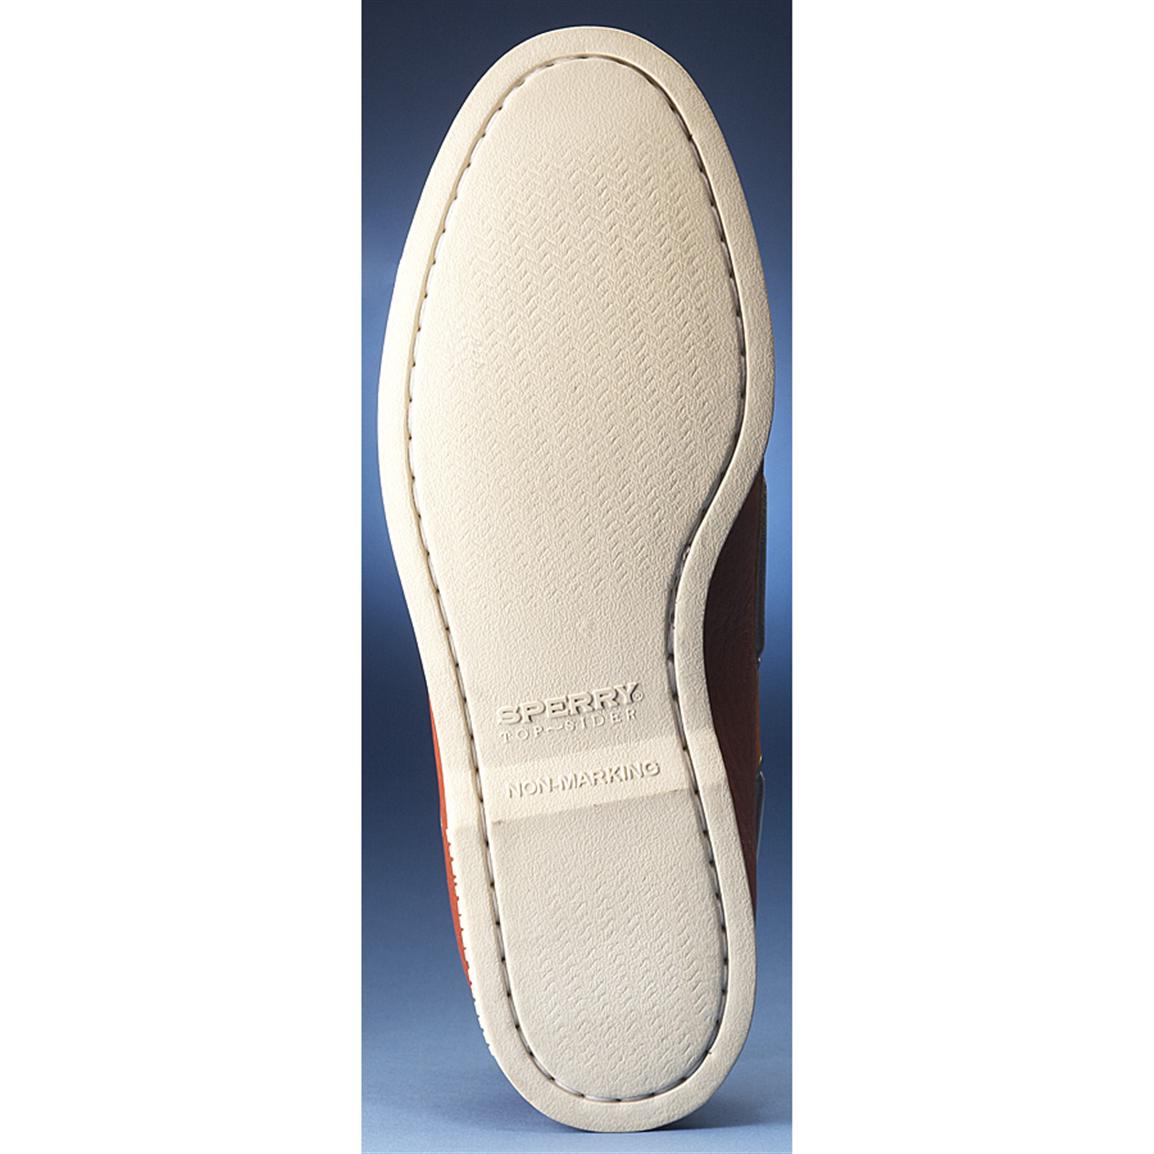 sperry top sider non marking